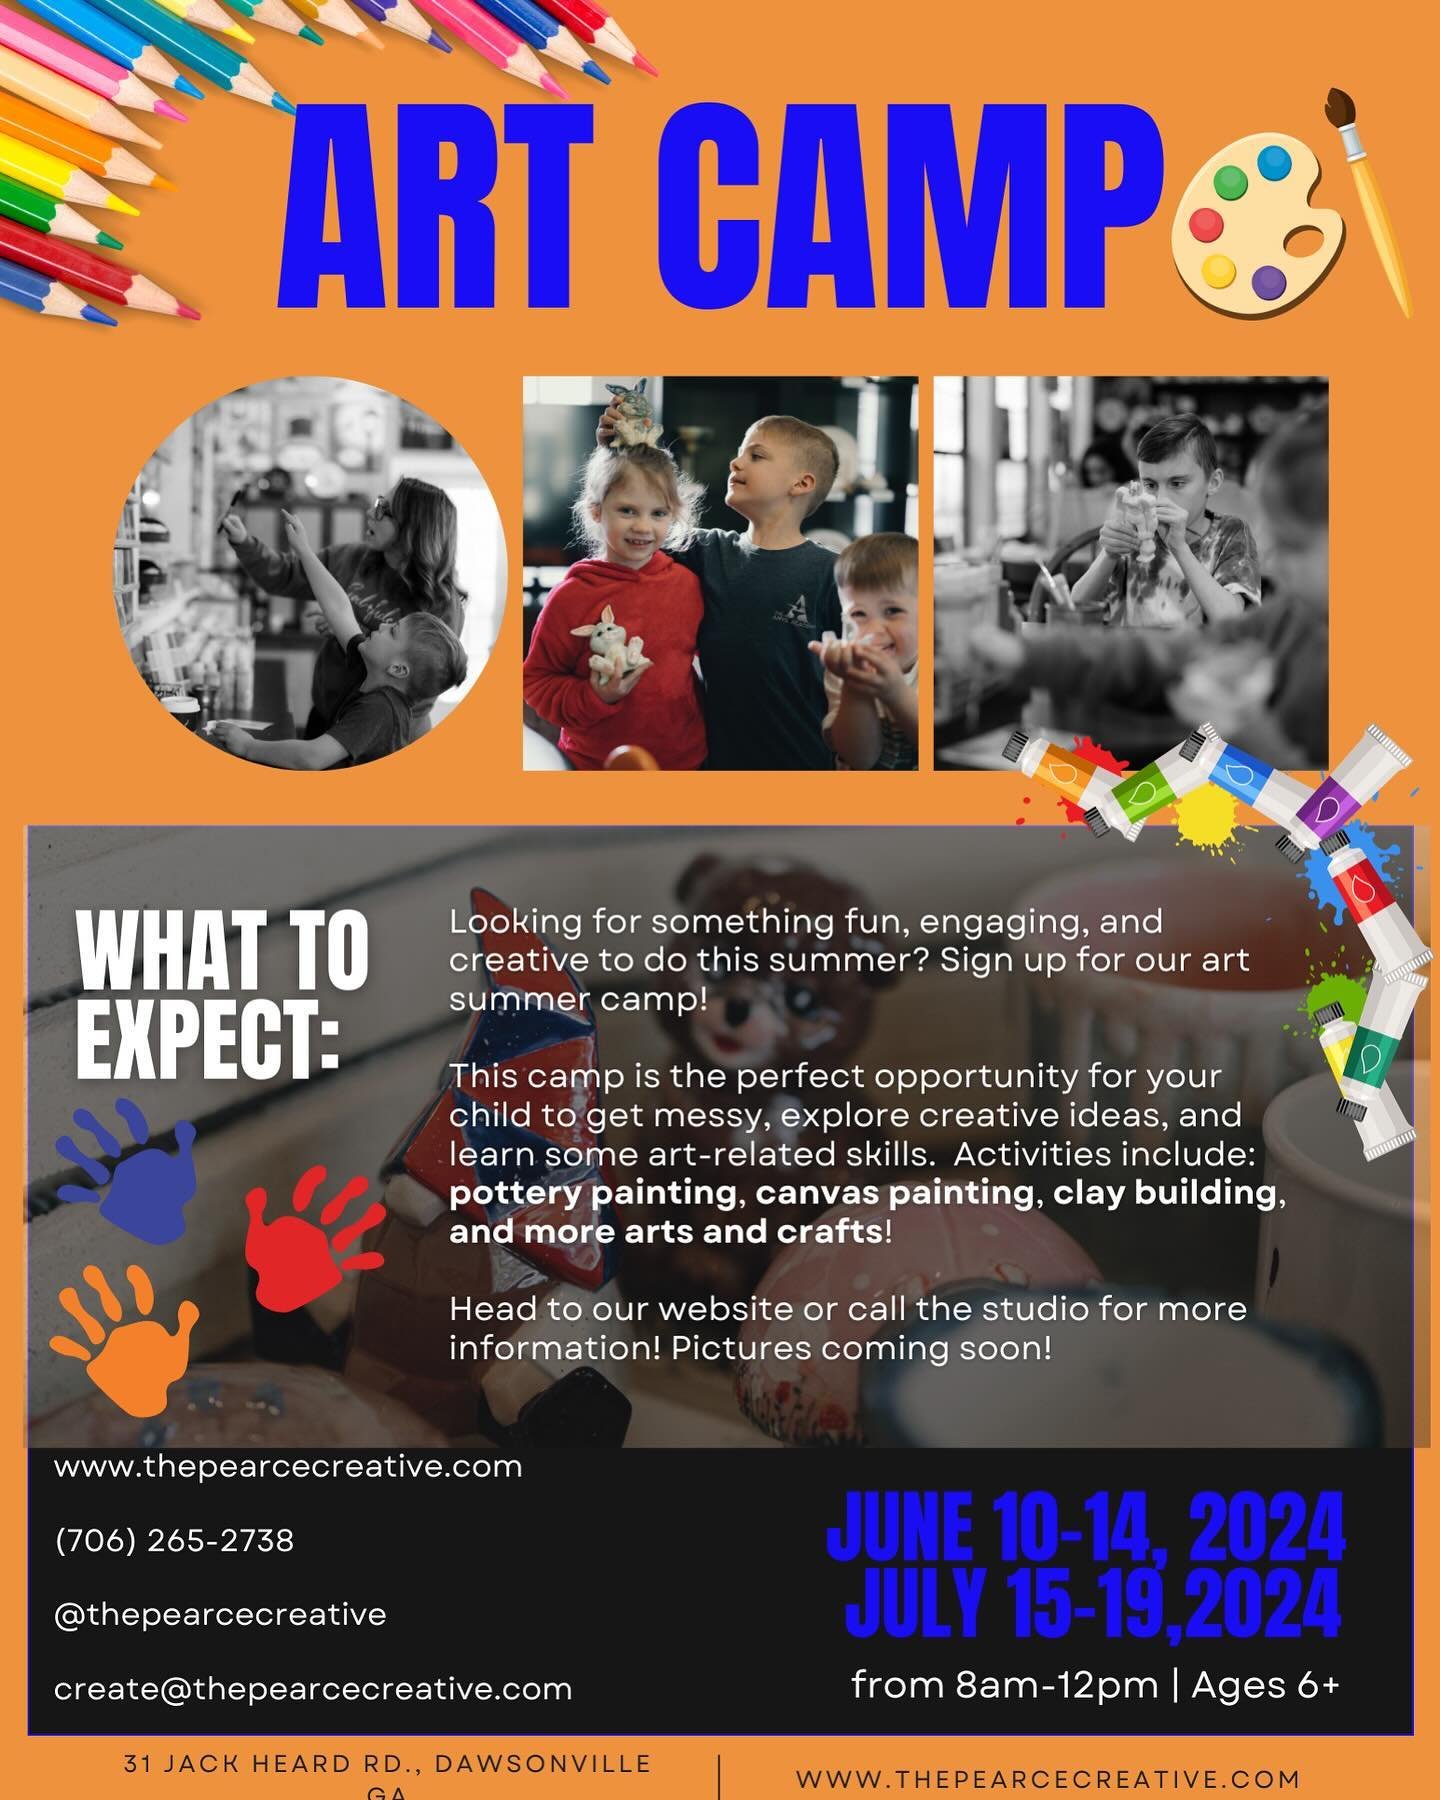 Introducing our summer art camps for 2024! Add it to your summer bucket list this year and get creative with us at The Pearce Creative !! ☀️🌊🏖️🐚

Visit our website, DM or email us for more information!! 

| family friendly art studio in Dawsonvill